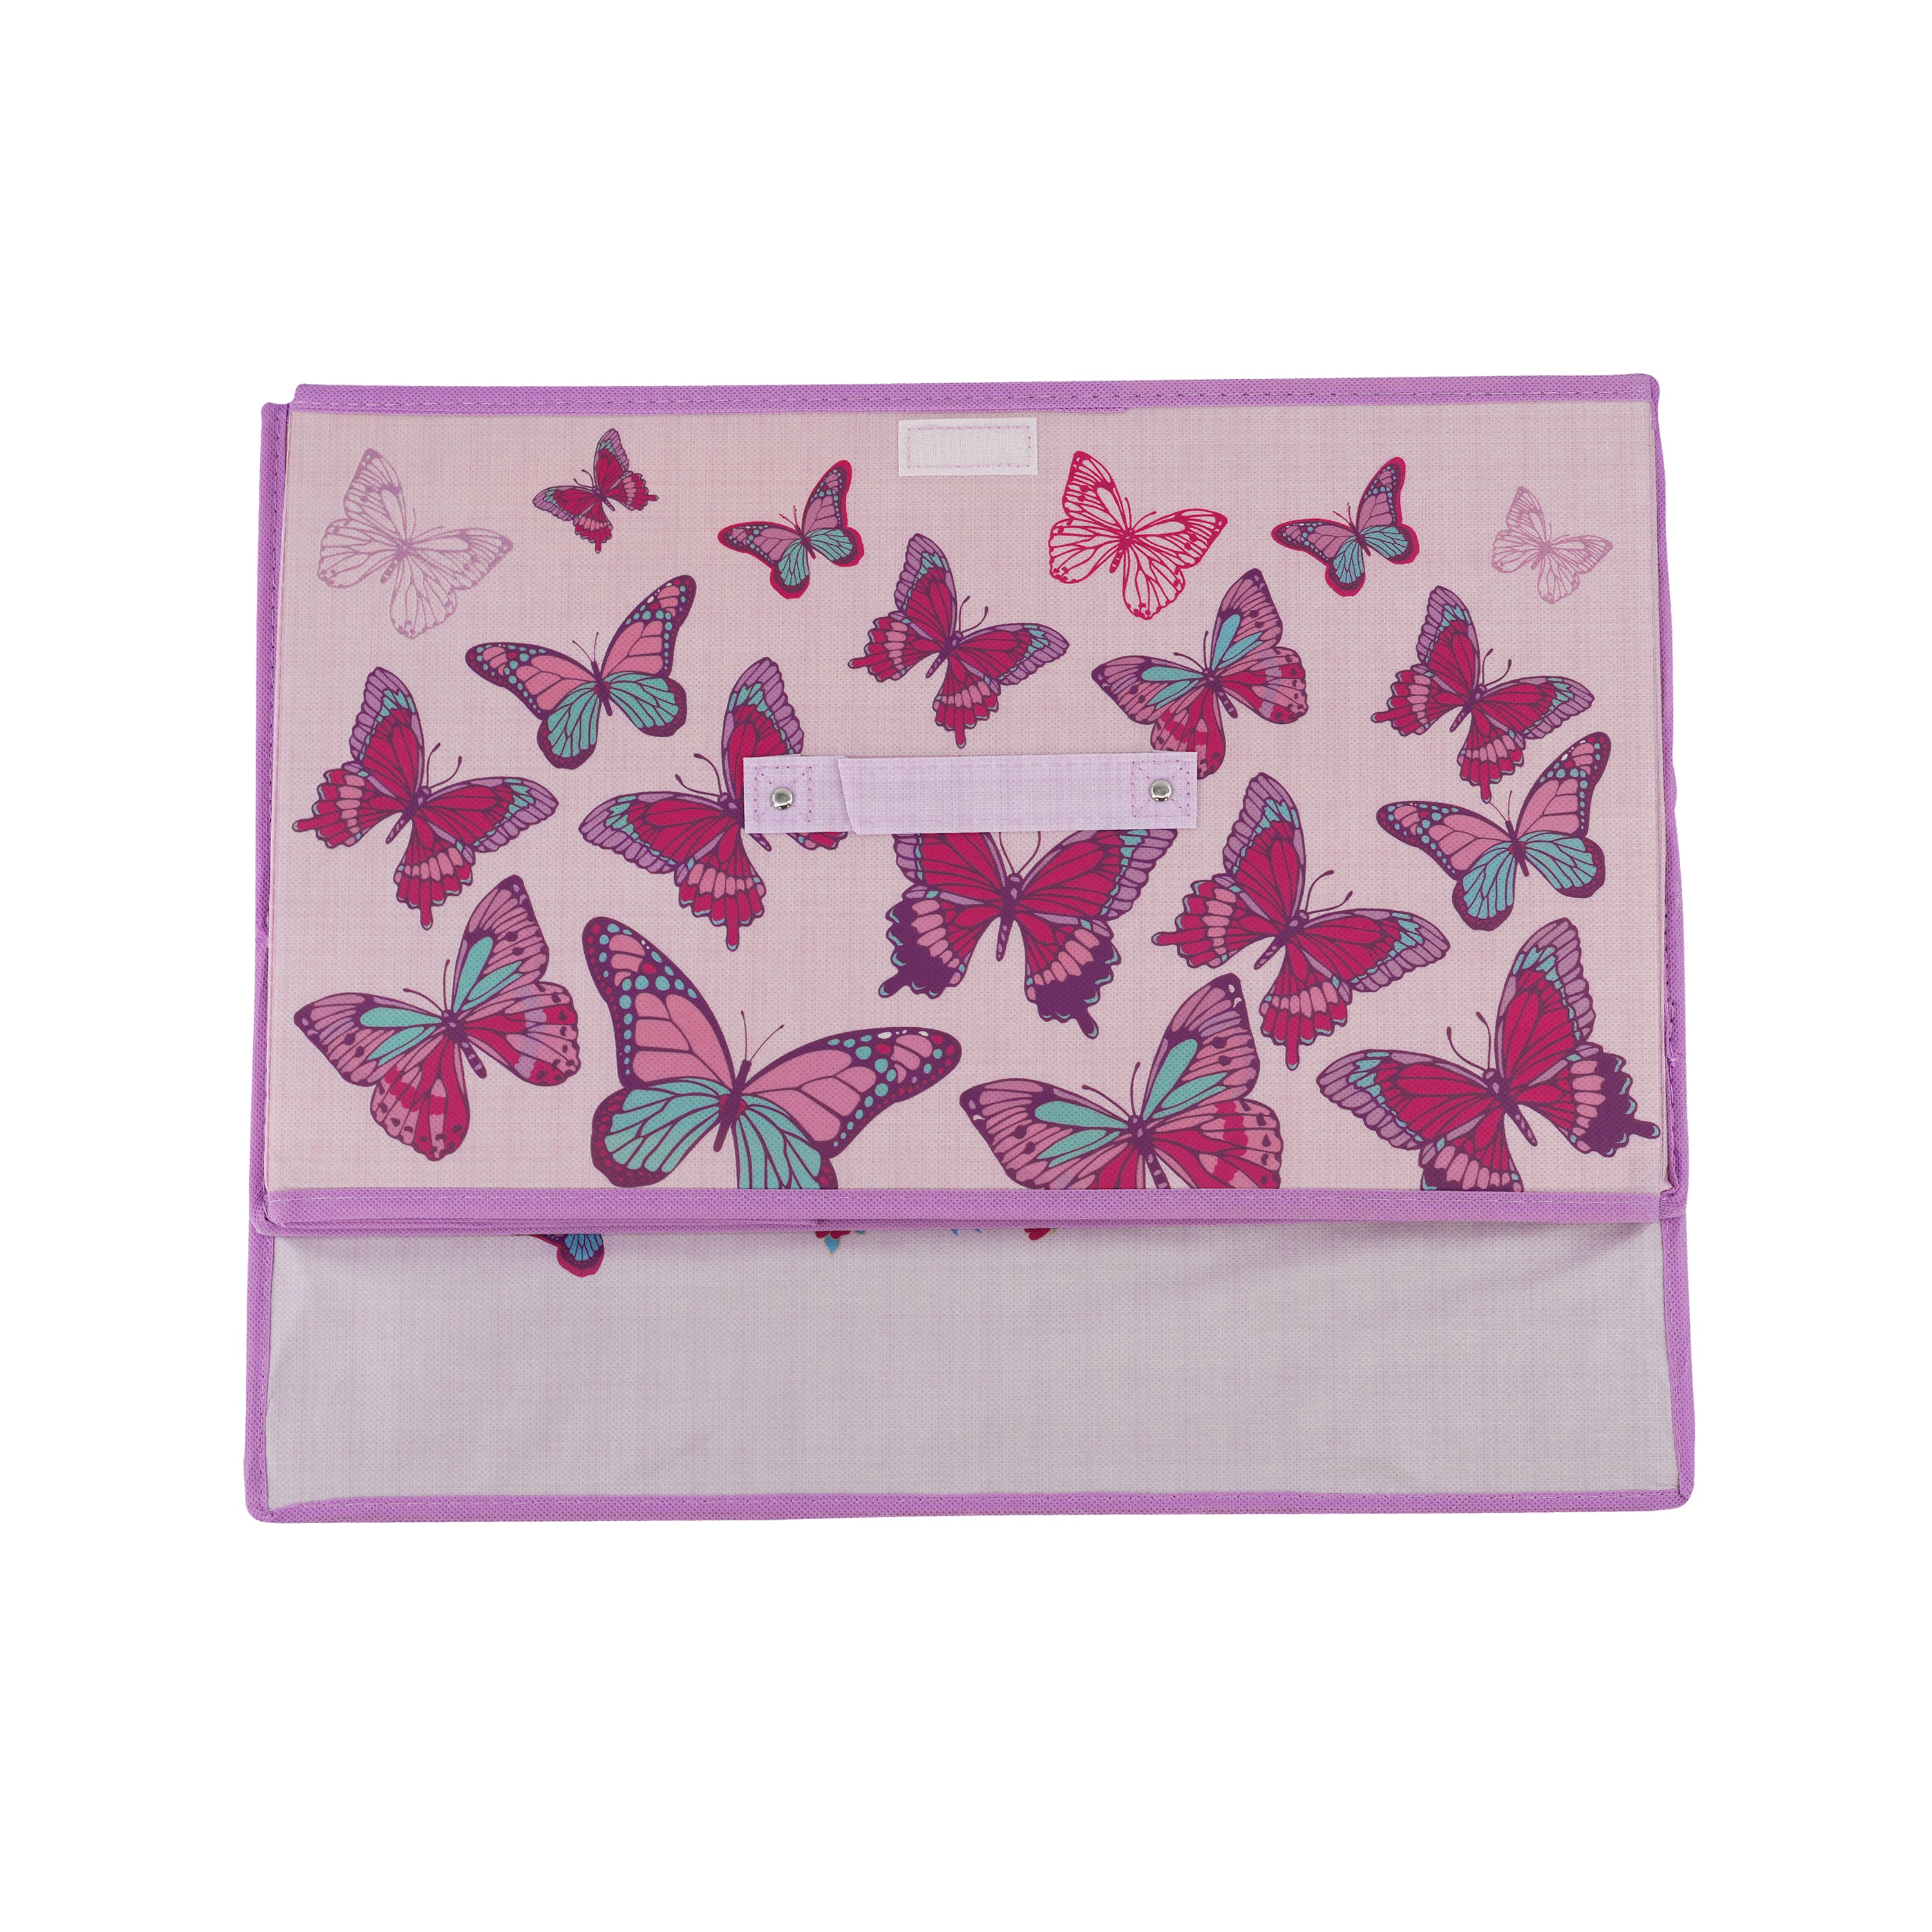 Butterfly Large Storage Box GEEZY - The Magic Toy Shop